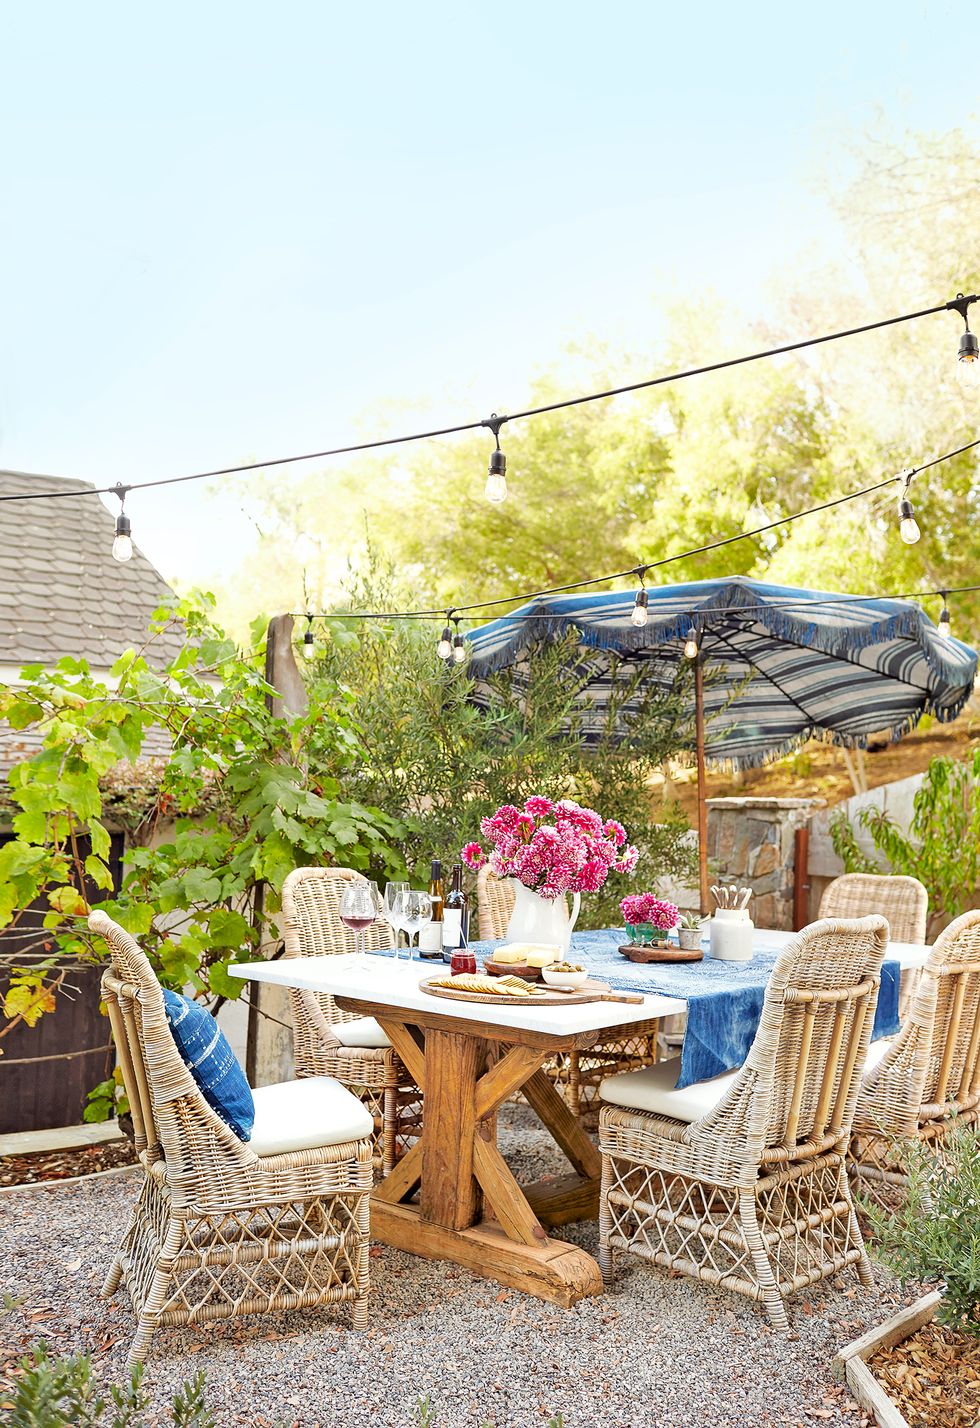 50 Best Patio and Porch Design Ideas - Decorating Your Outdoor Space